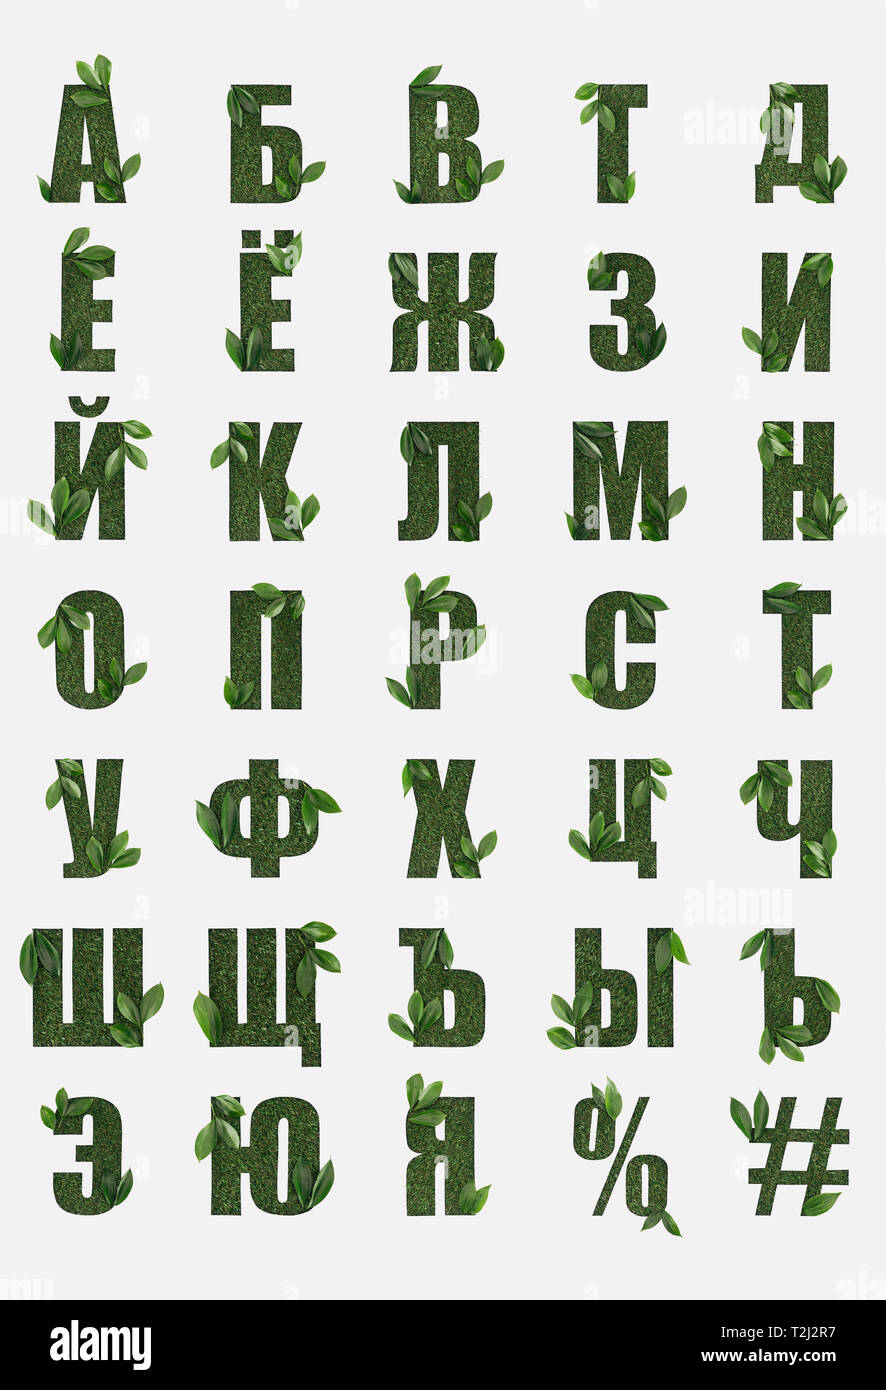 cyrillic letters from russian alphabet made of green grass with fresh leaves isolated on white Stock Photo